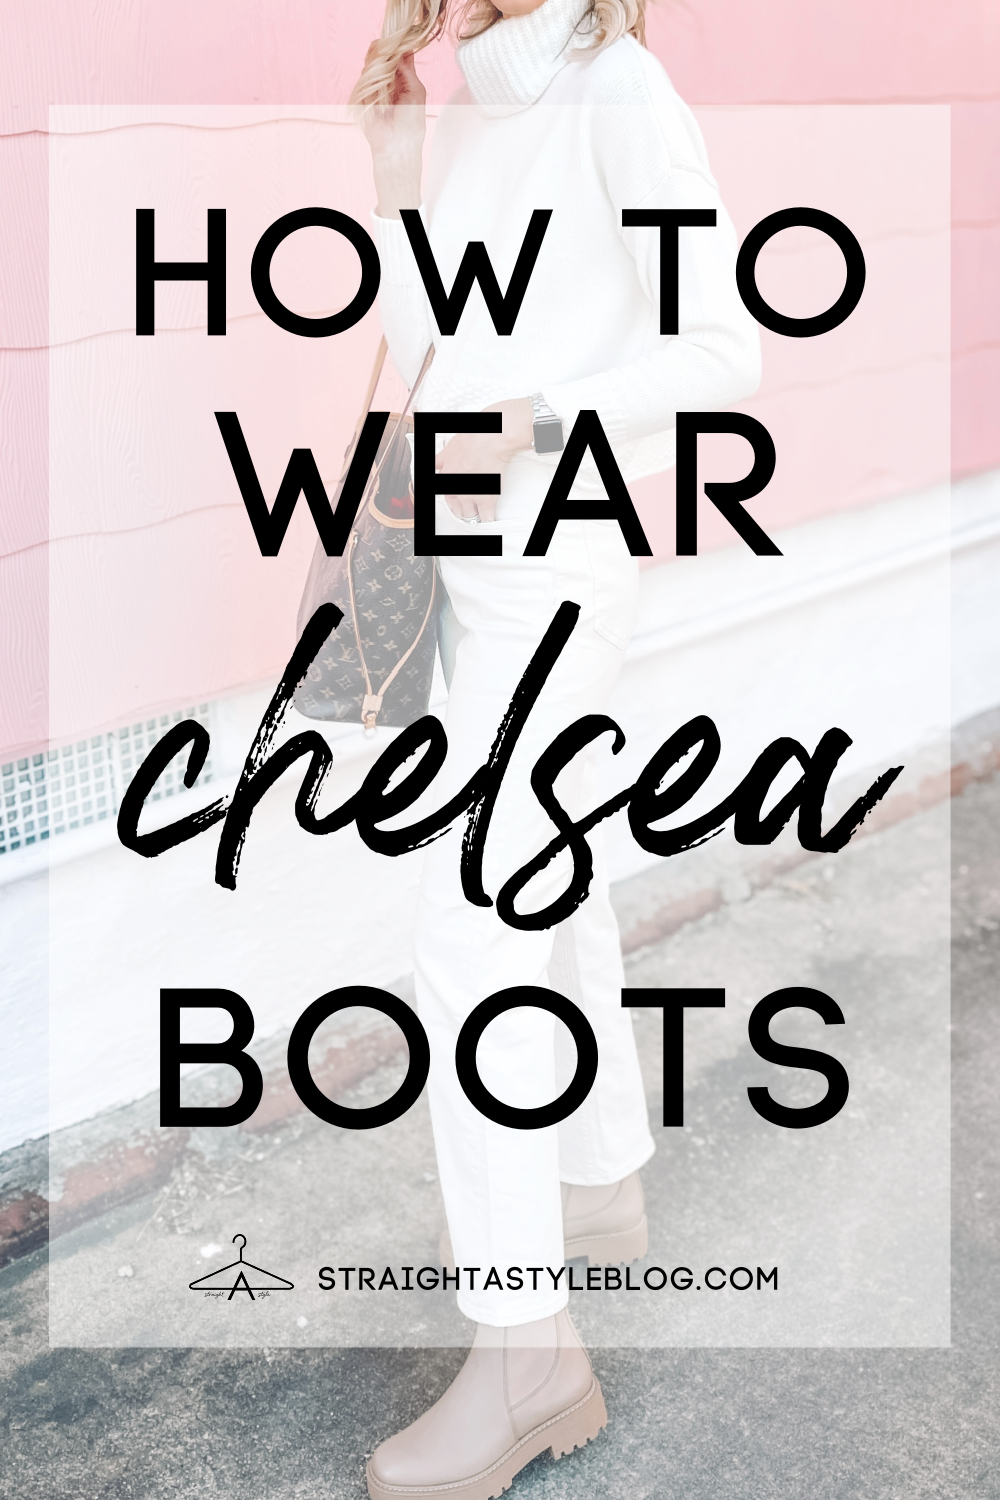 How to Wear Boots with Jeans for - Straight A Style